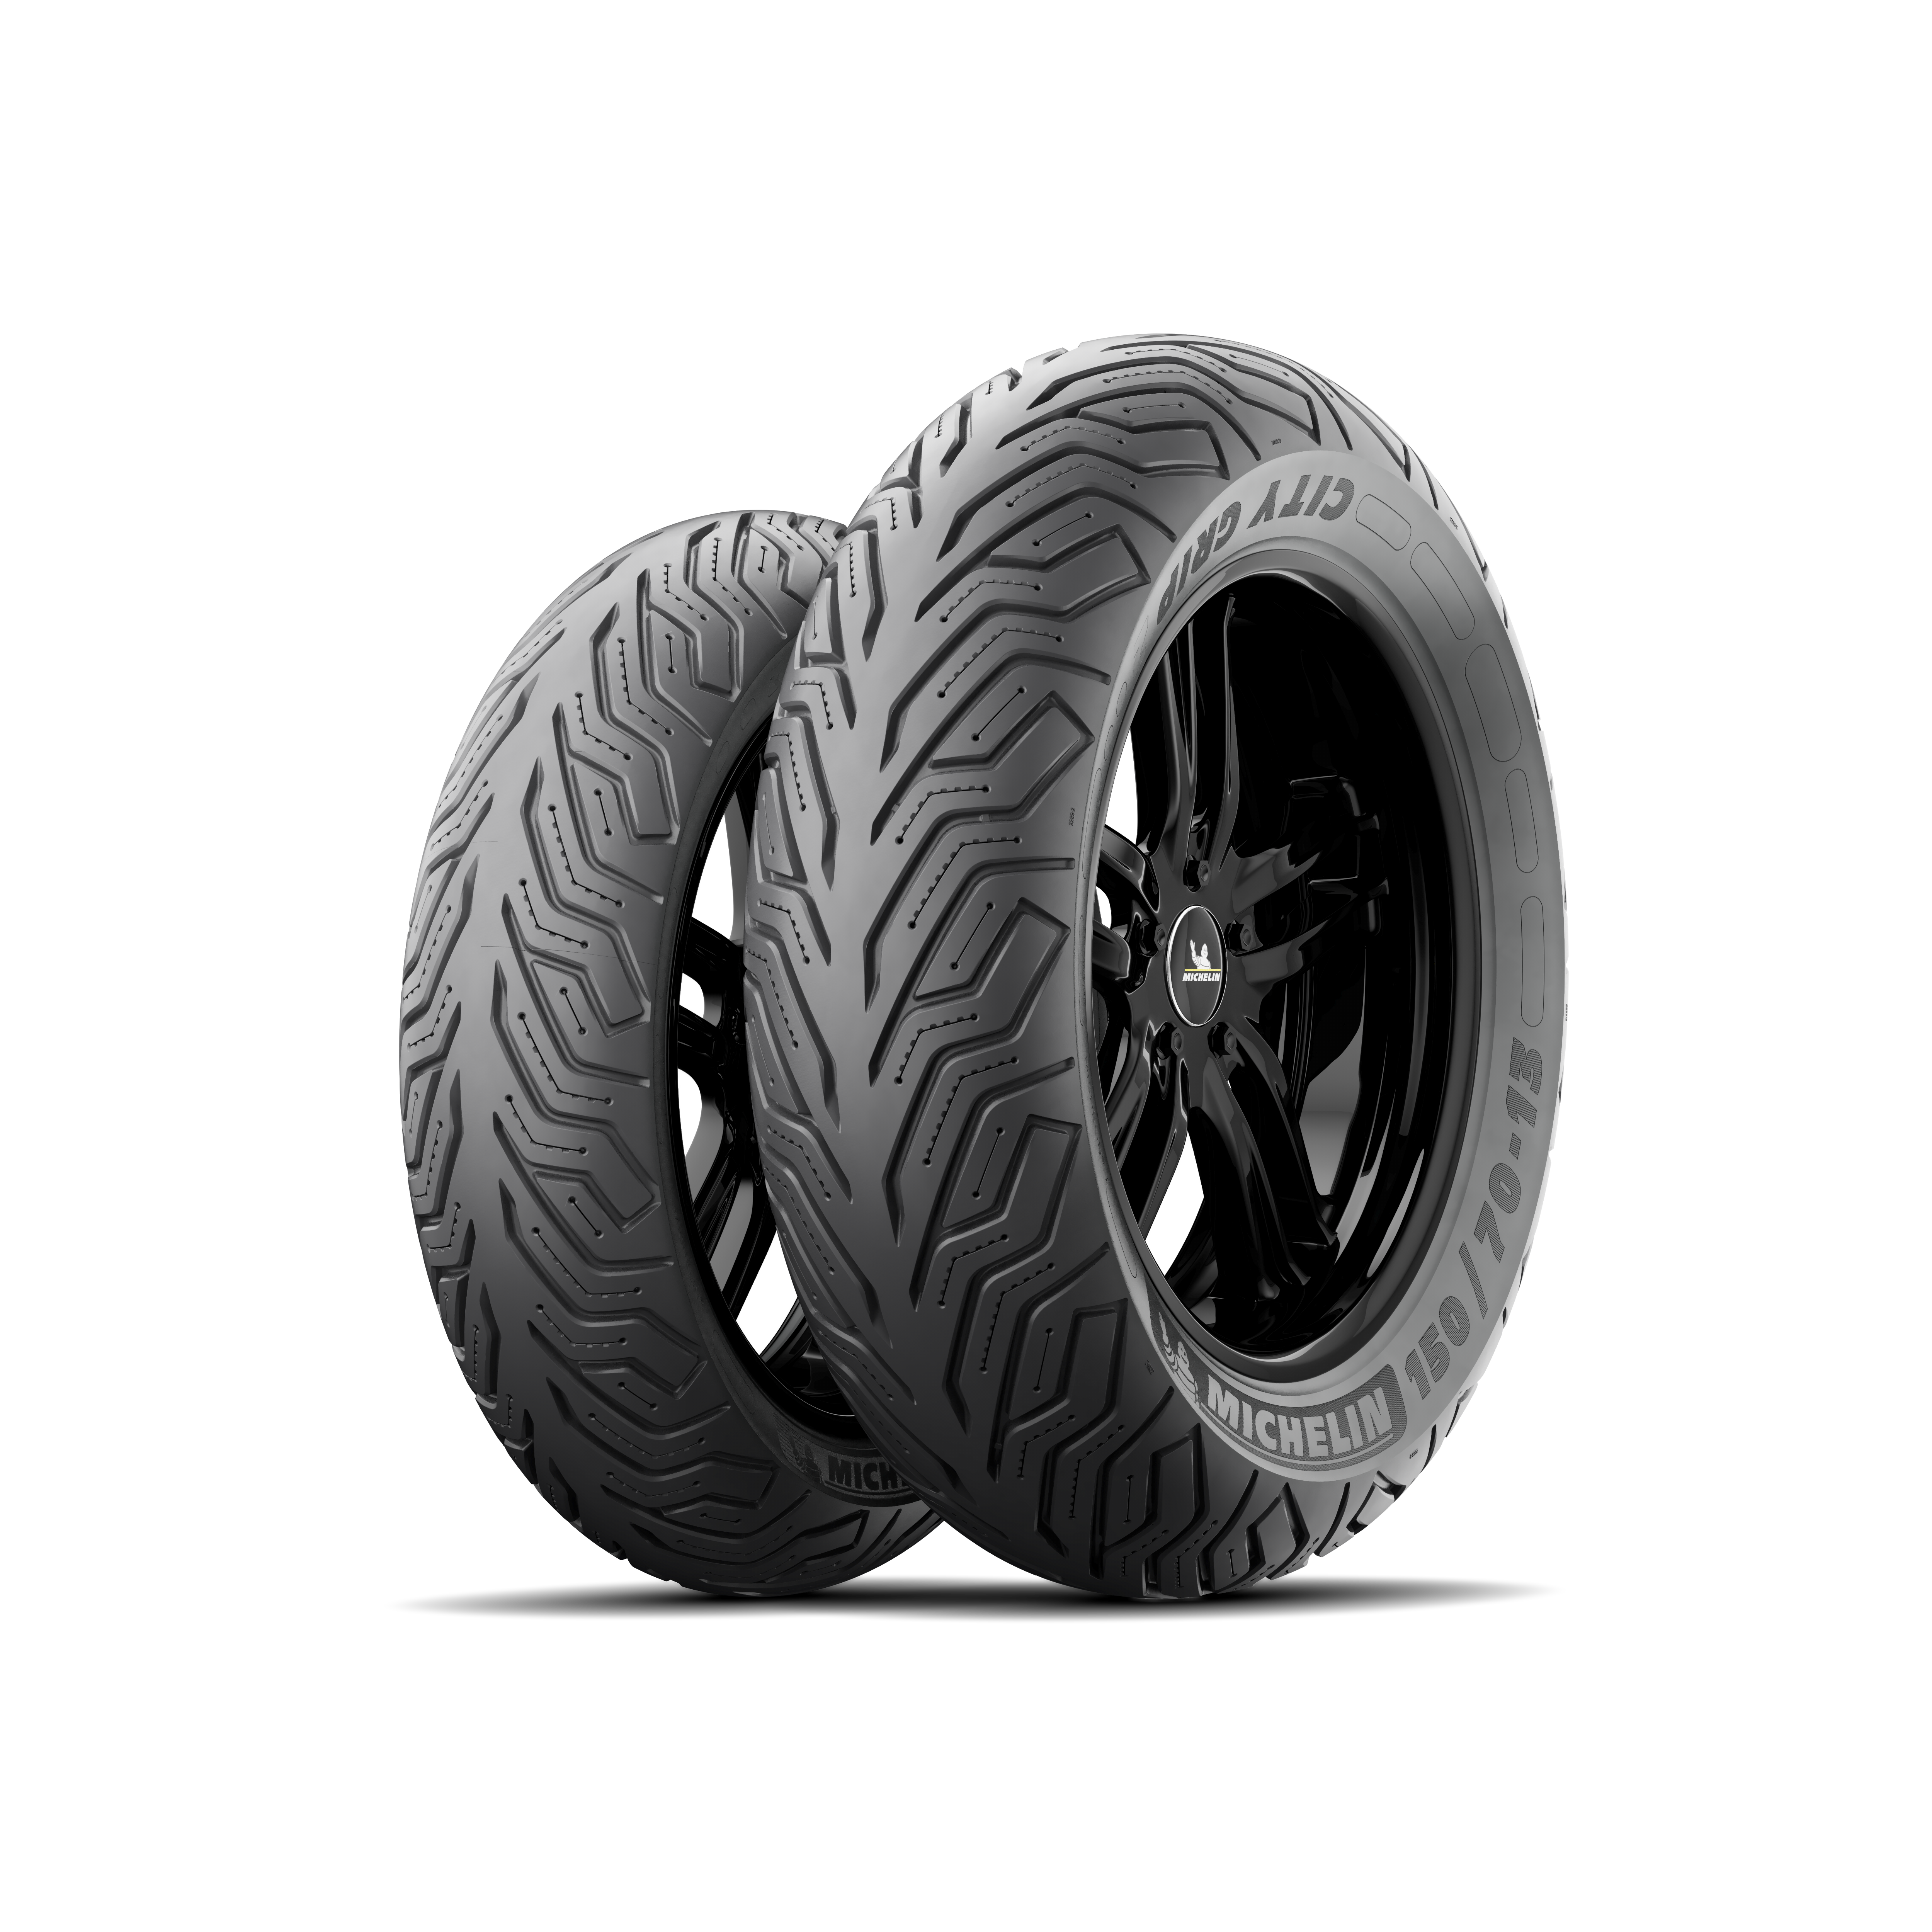 120/80-16 MICHELIN City Grip 2 Front/Rear Scooter Tire 